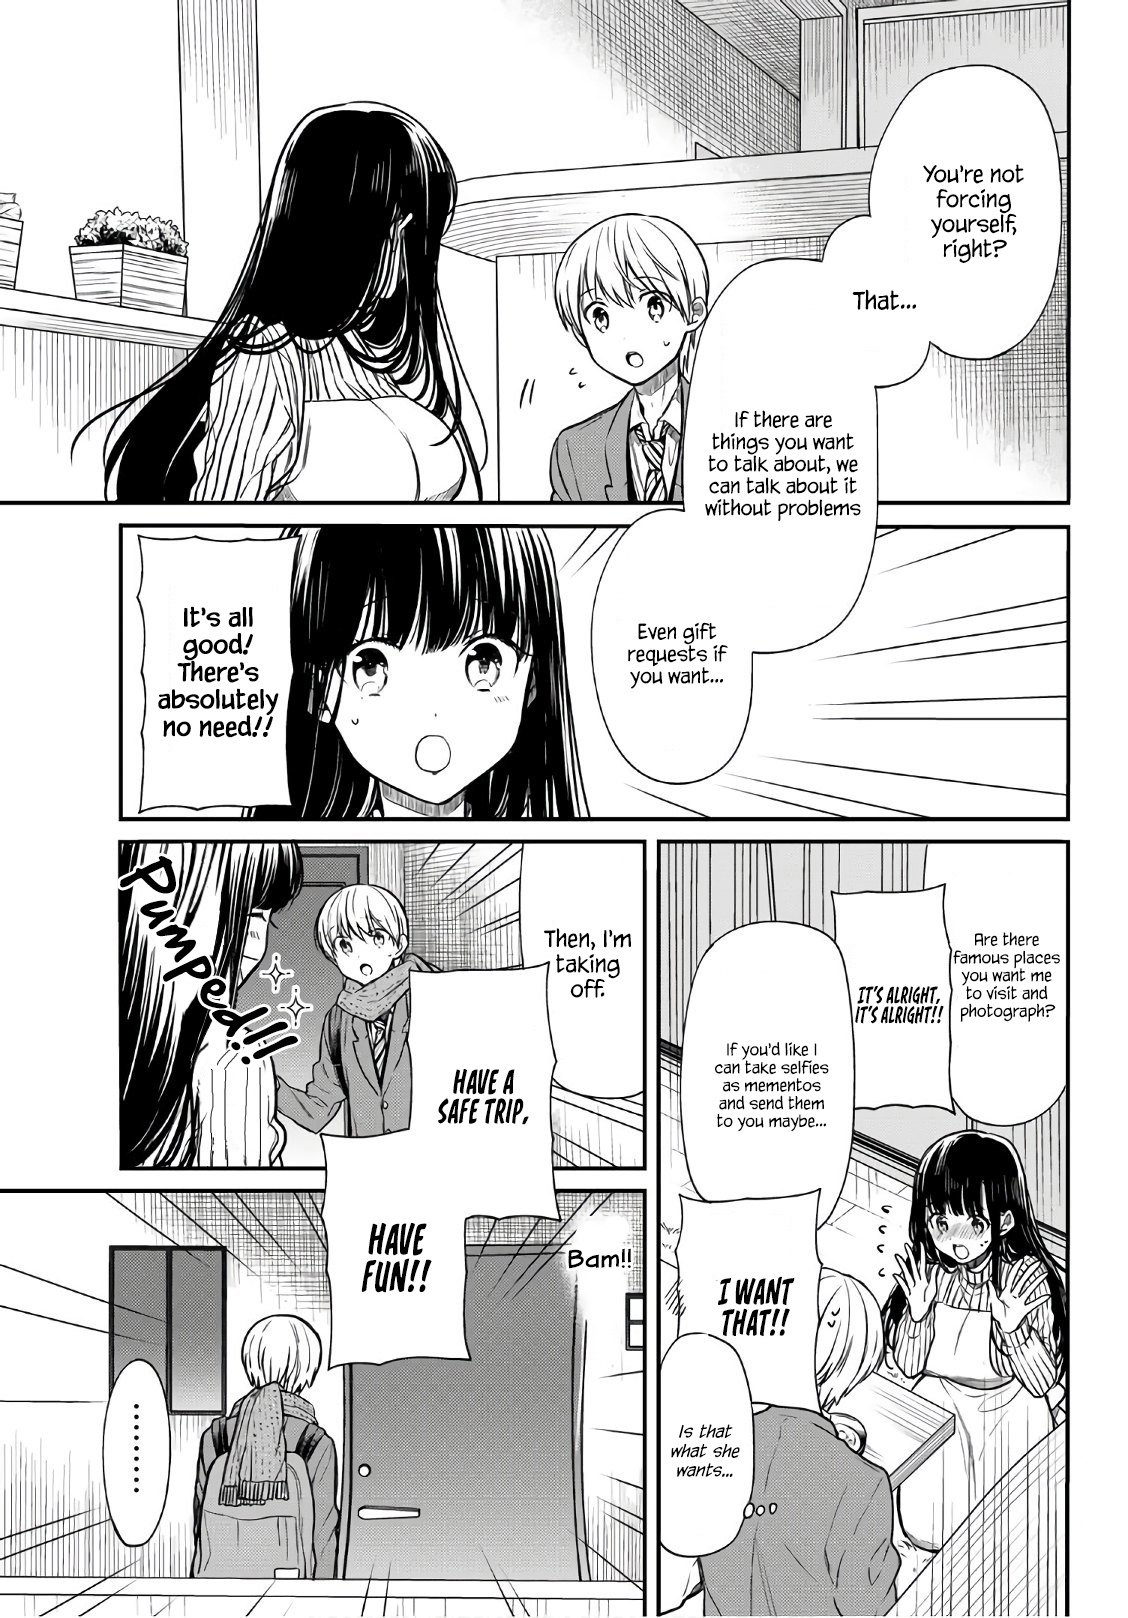 The Story of an Onee-San Who Wants to Keep a High School Boy vol.5 ch.119